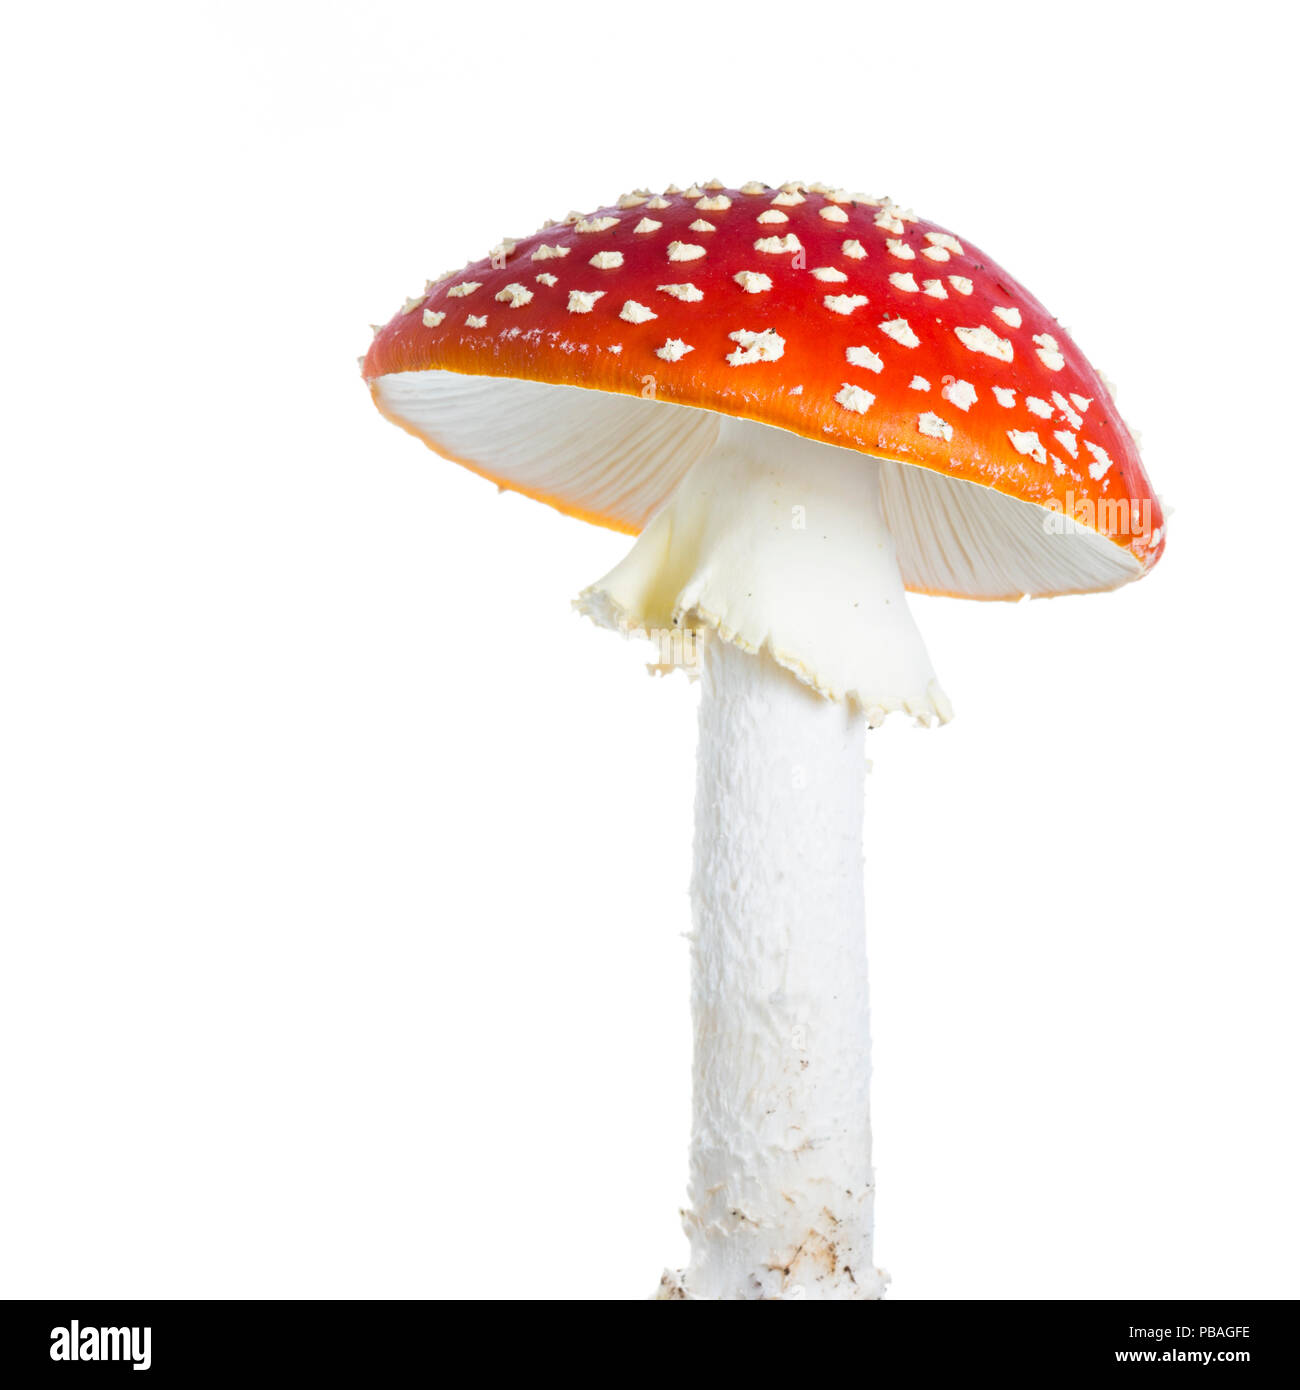 Fly agaric (amanita muscaria), Maine-et-Loire, Francia, ottobre, progetto meetyourneighbors.net Foto Stock